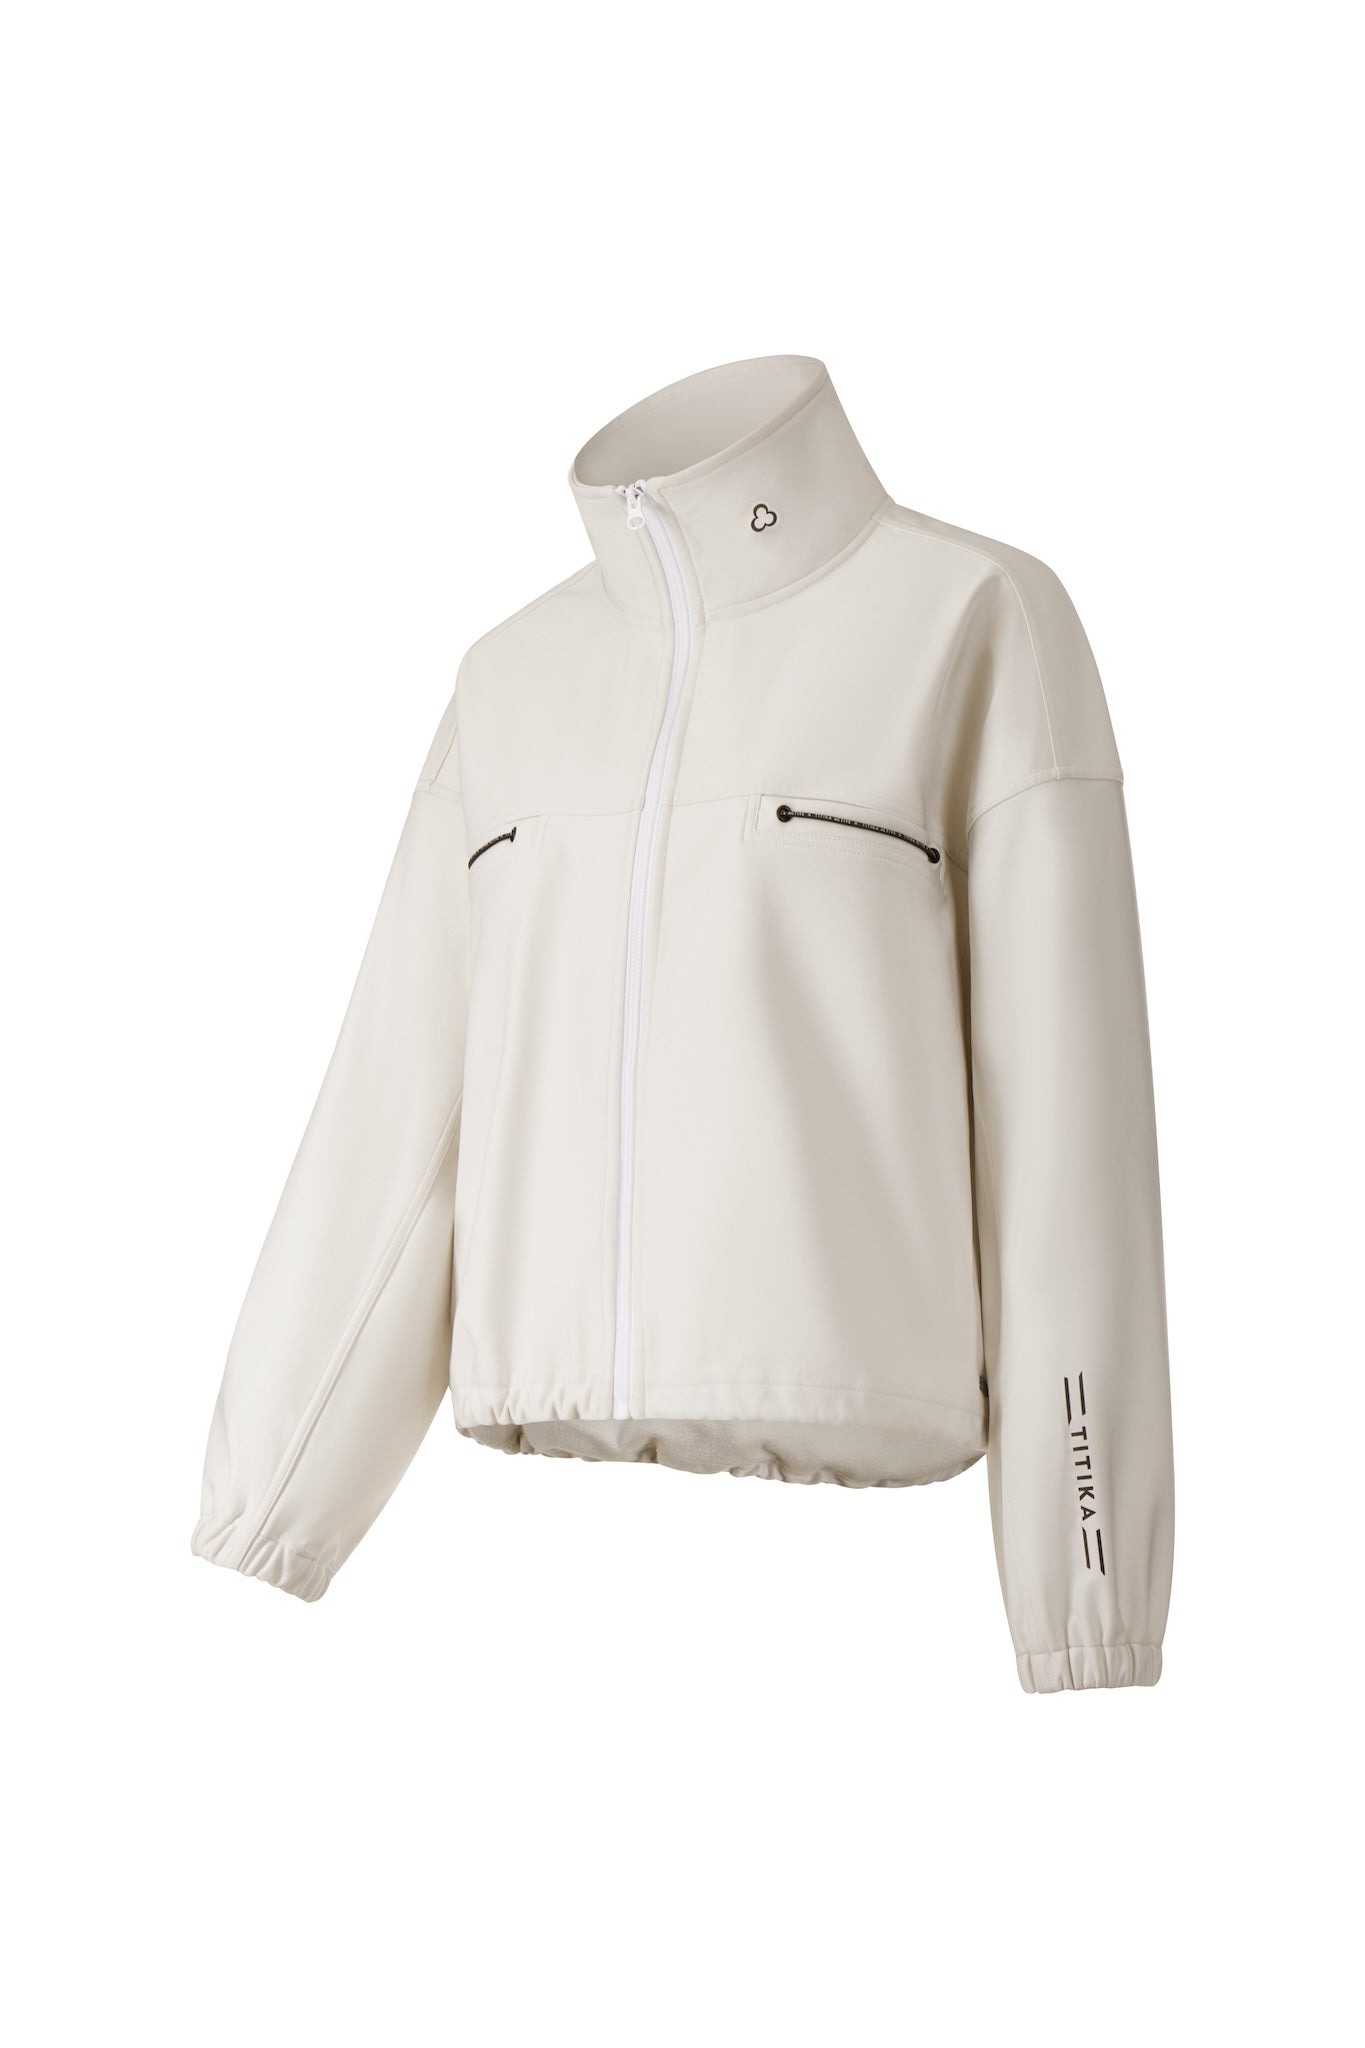 Water-resistant and Fleece-lined Sports Jacket